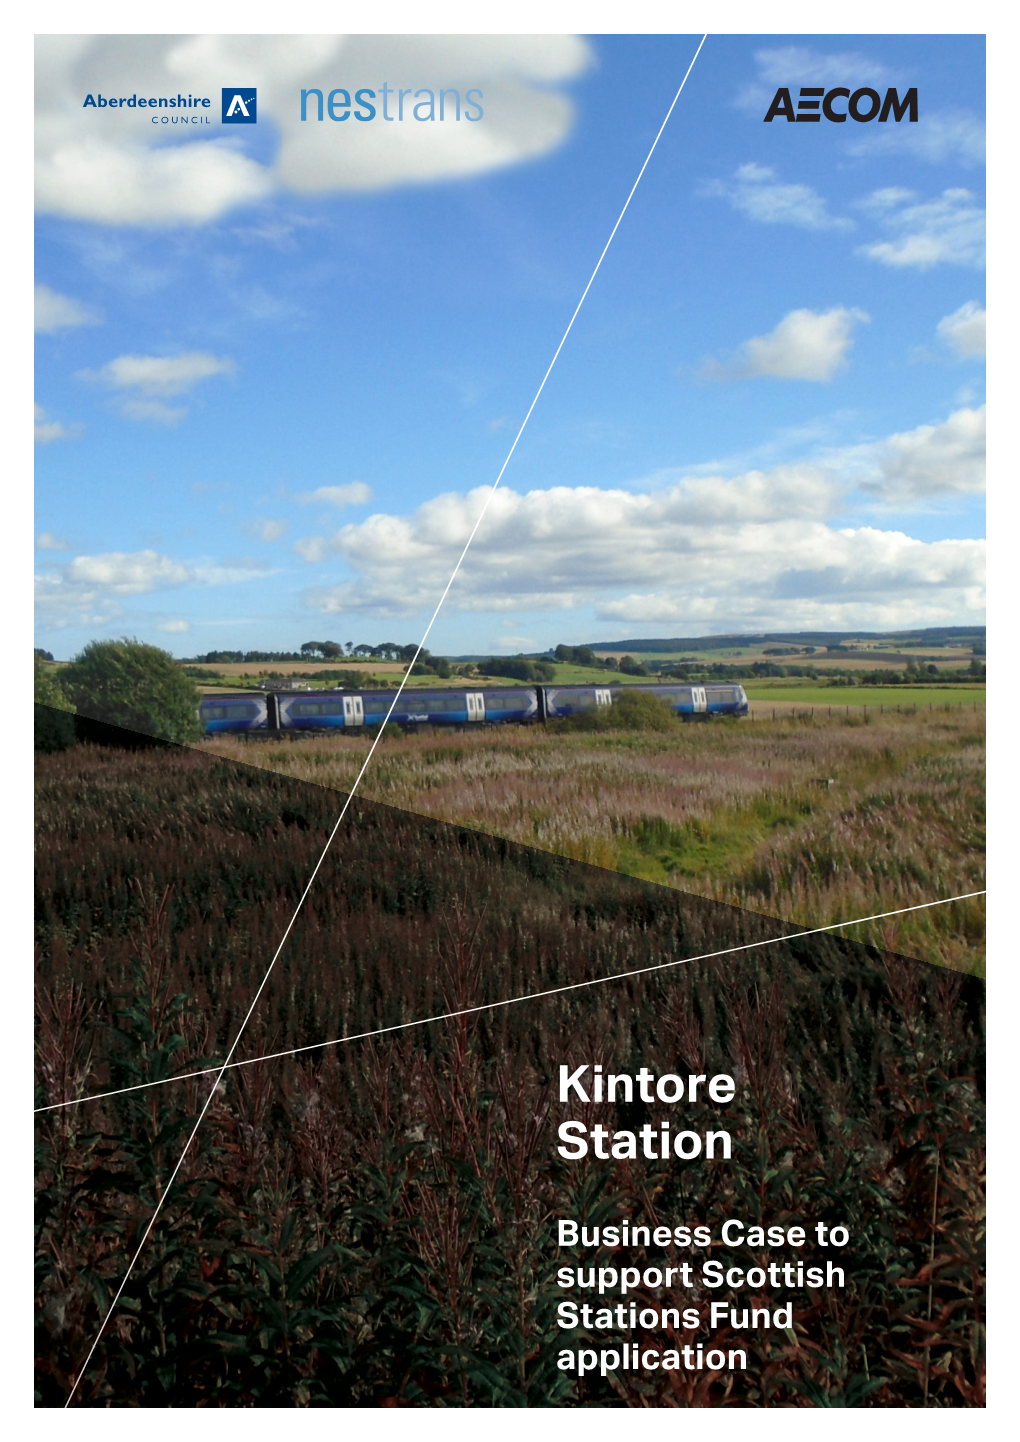 Kintore Station Business Case, in Particular Within the Demand Forecasting Analysis